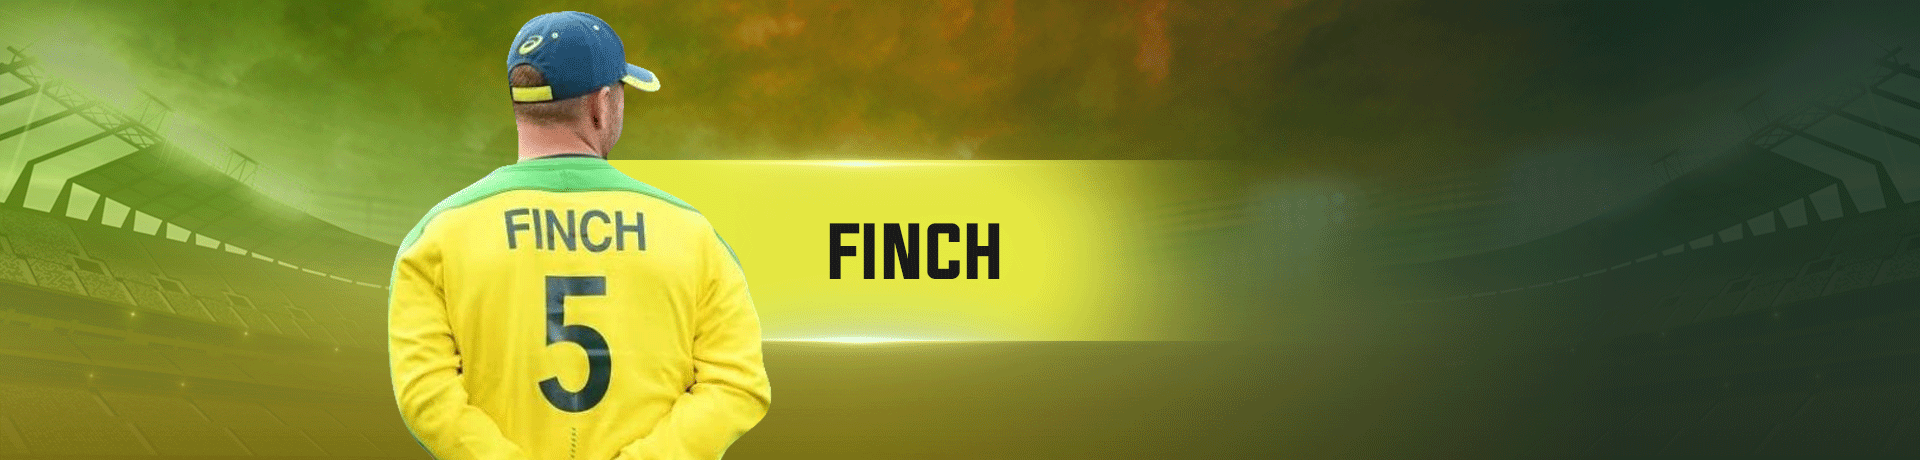 Aaron Finch Profile: Stats, Ranking, Records, Current Teams